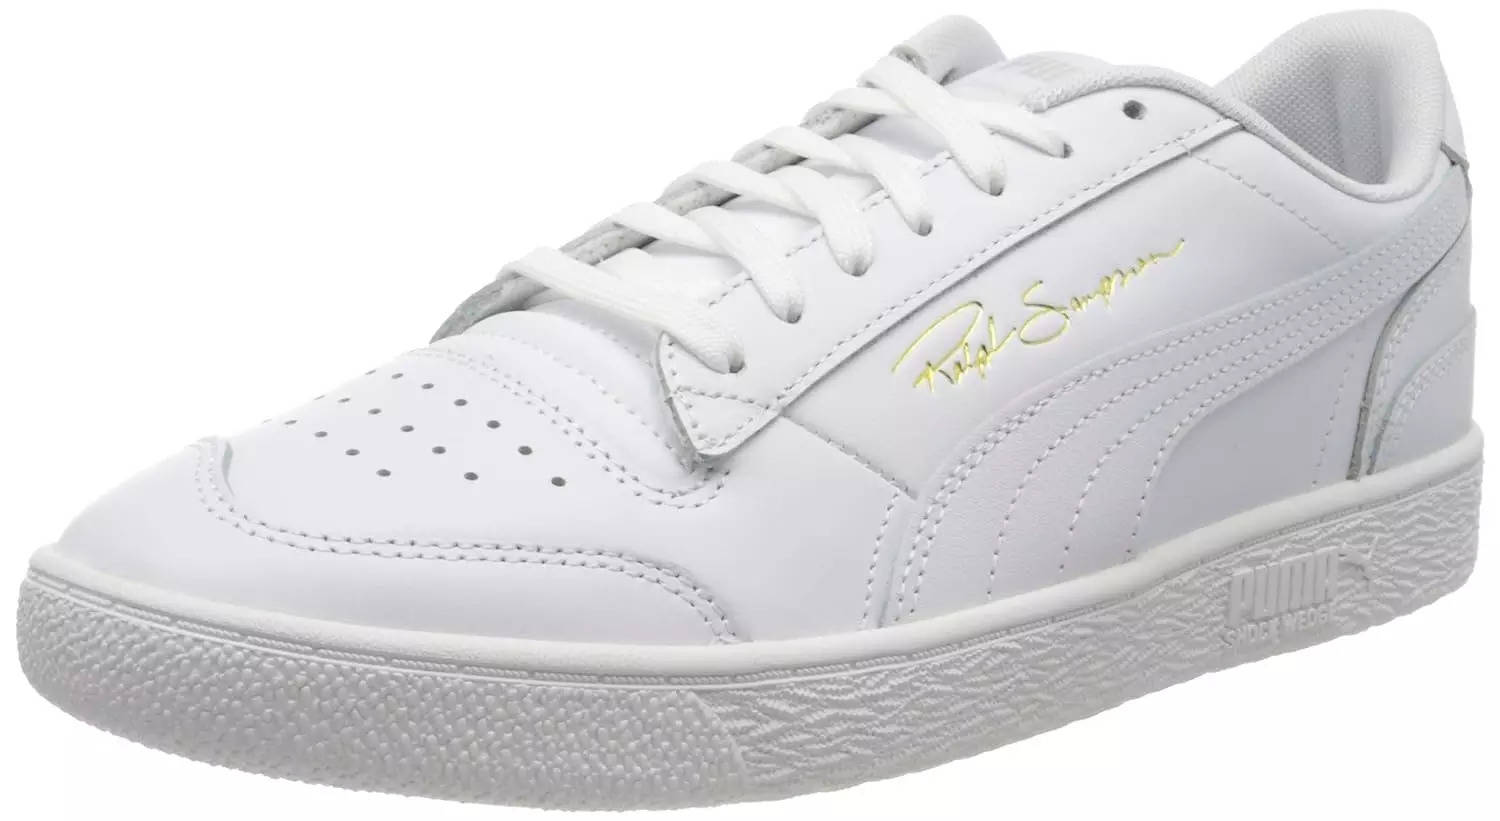 Puma White Sneakers for Men: 6 Best Puma White Sneakers for Men for a ...